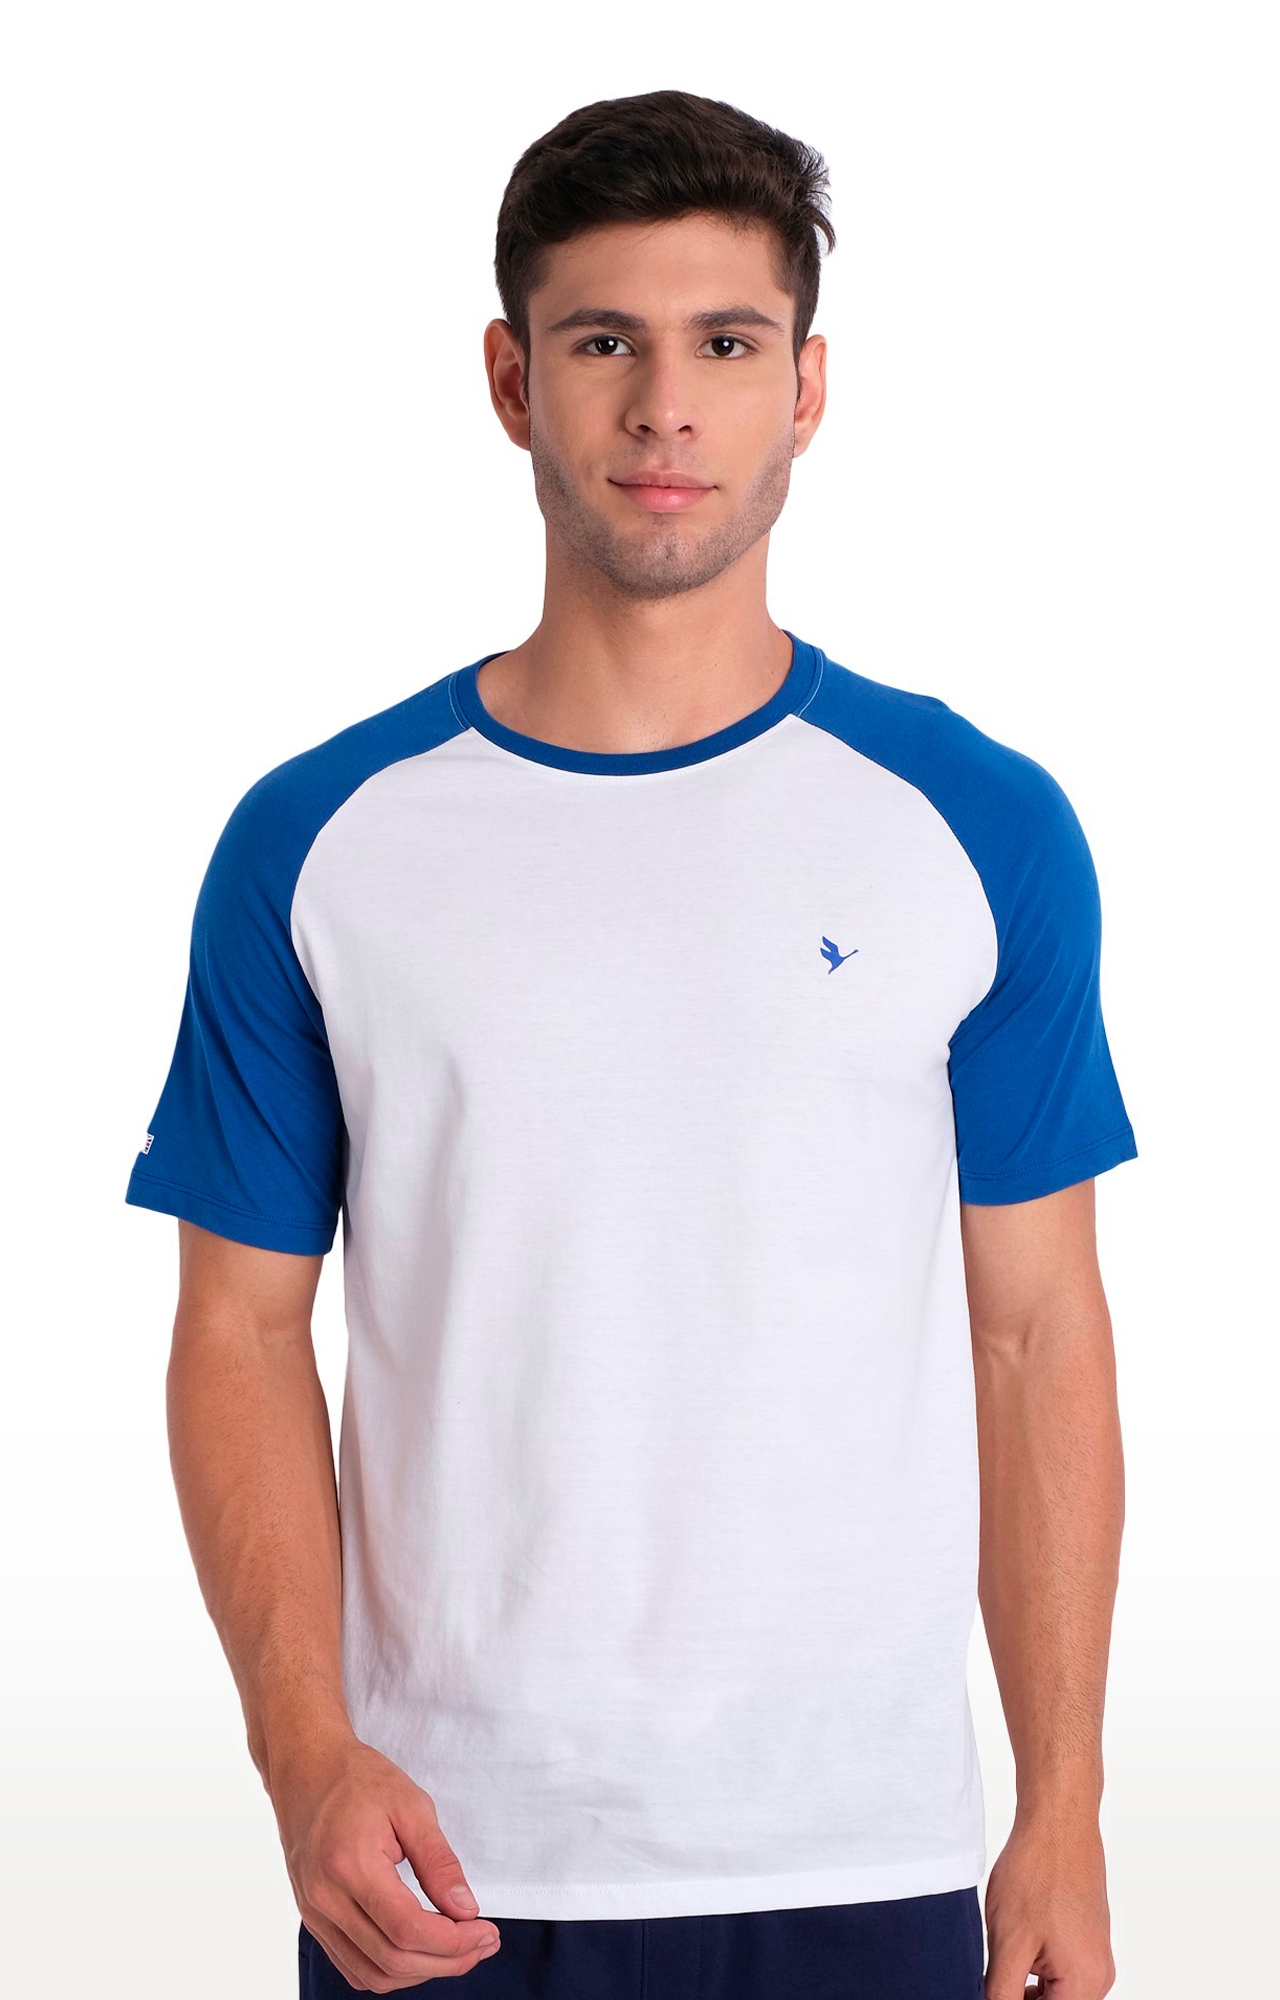 Men's White and Blue Cotton Solid Regular T-Shirt